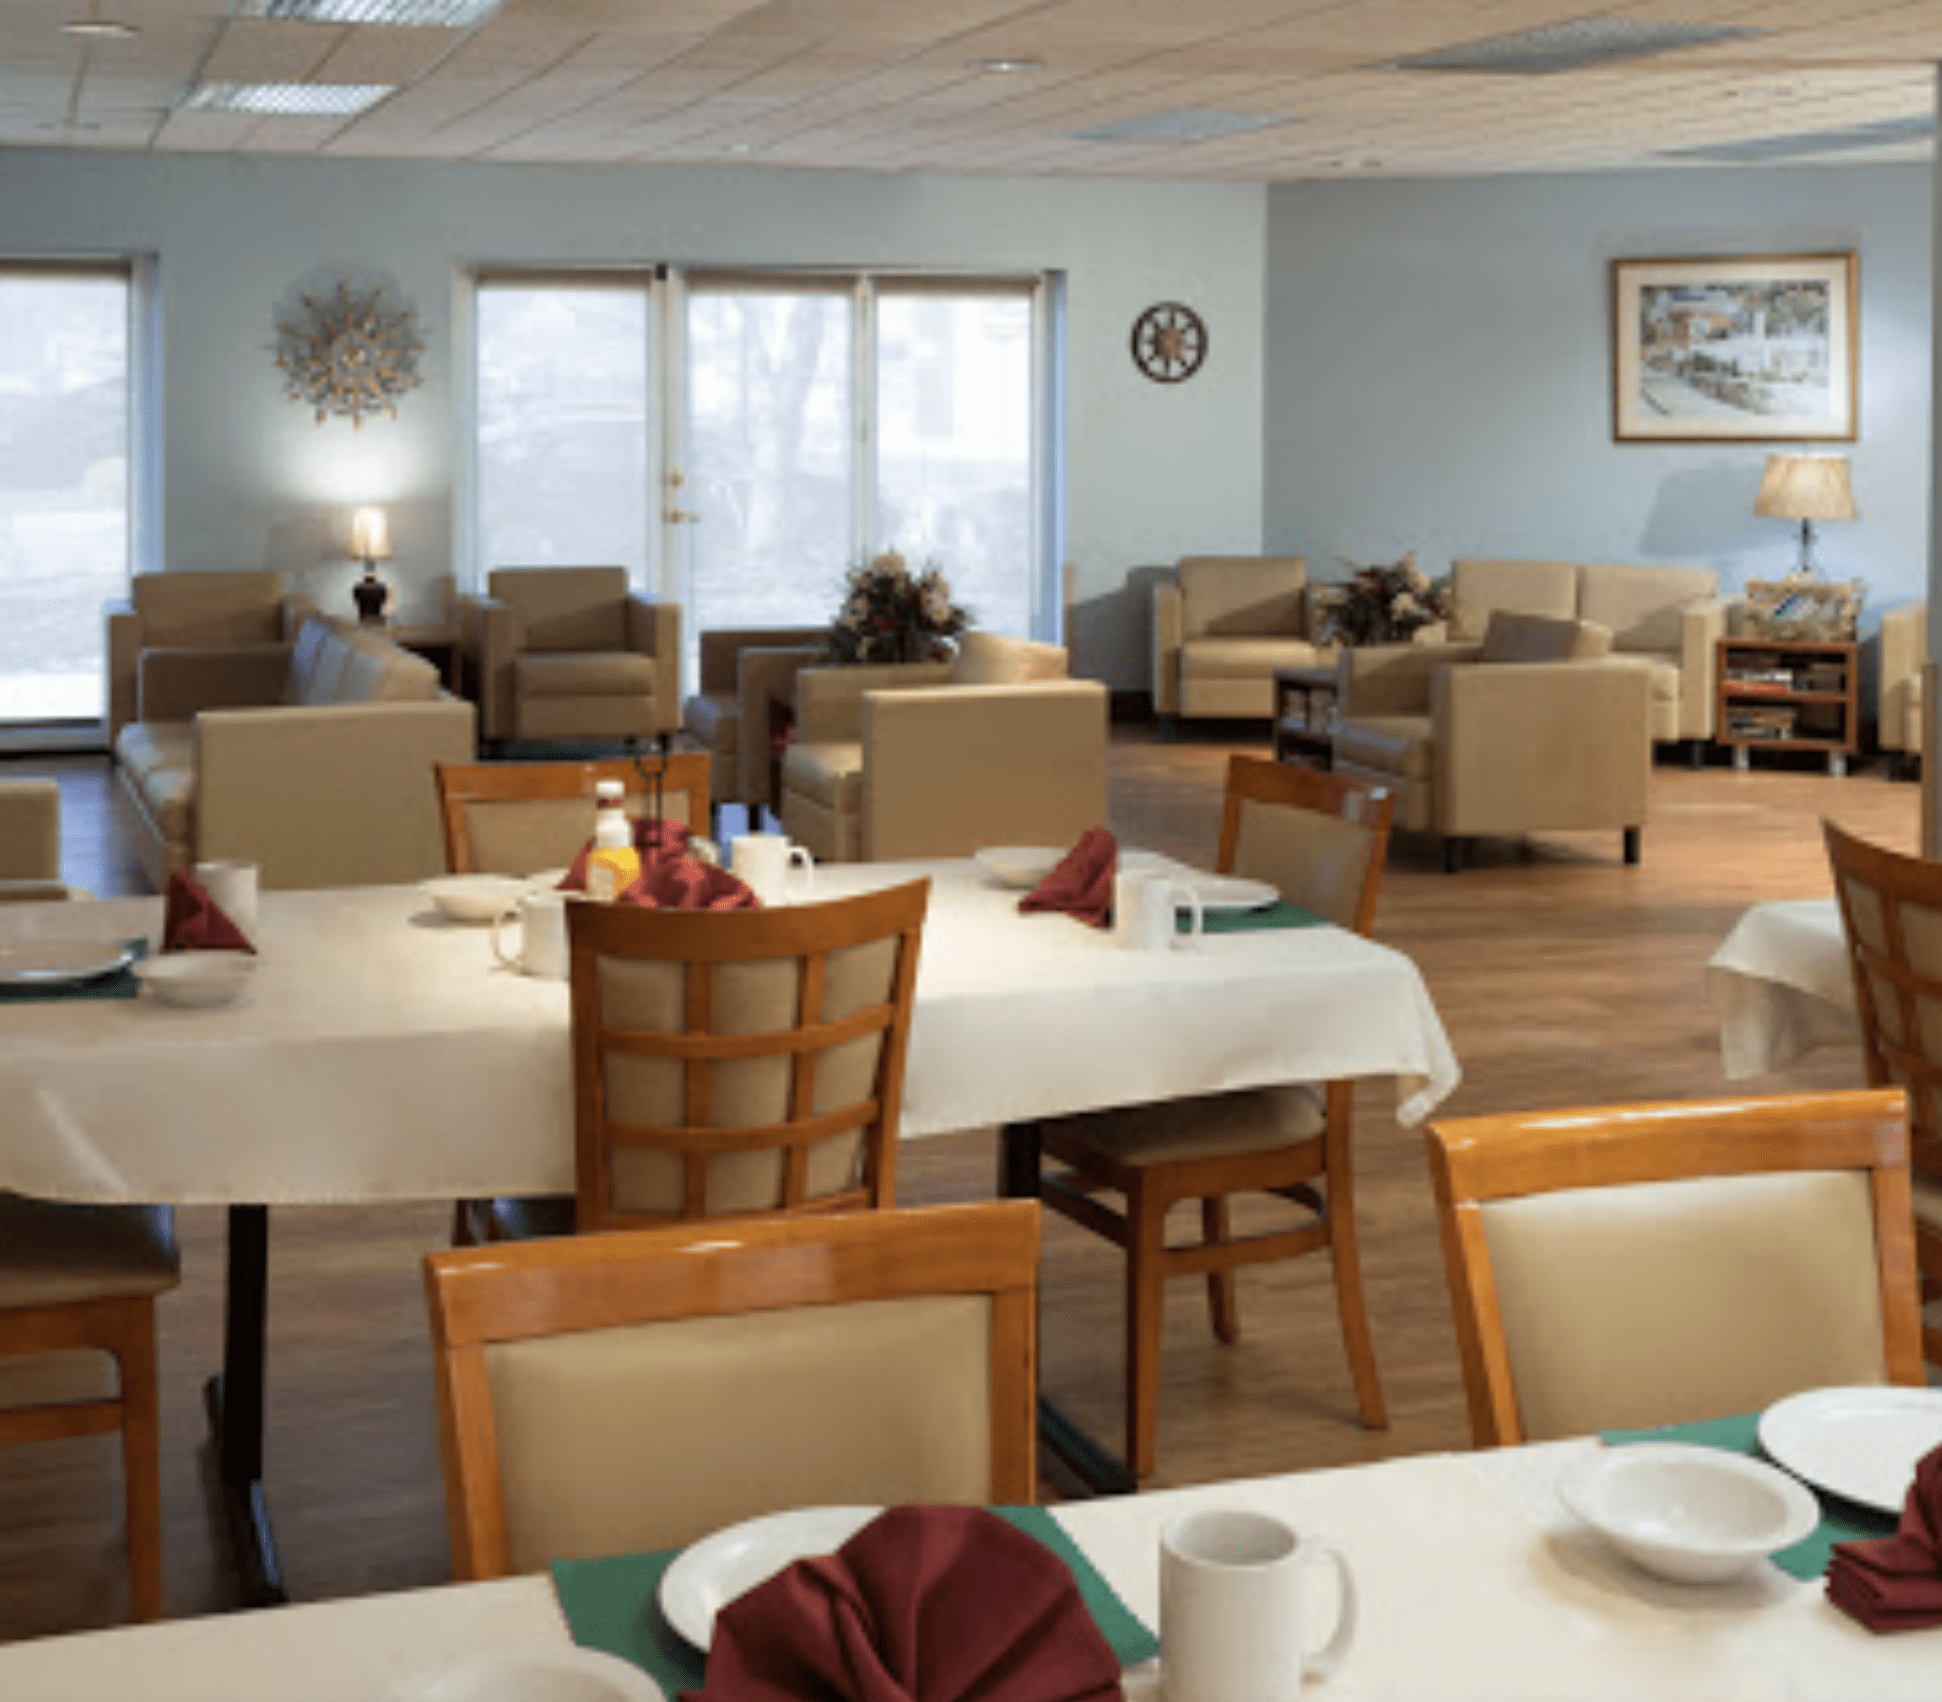 Serenity Care Old Forge 